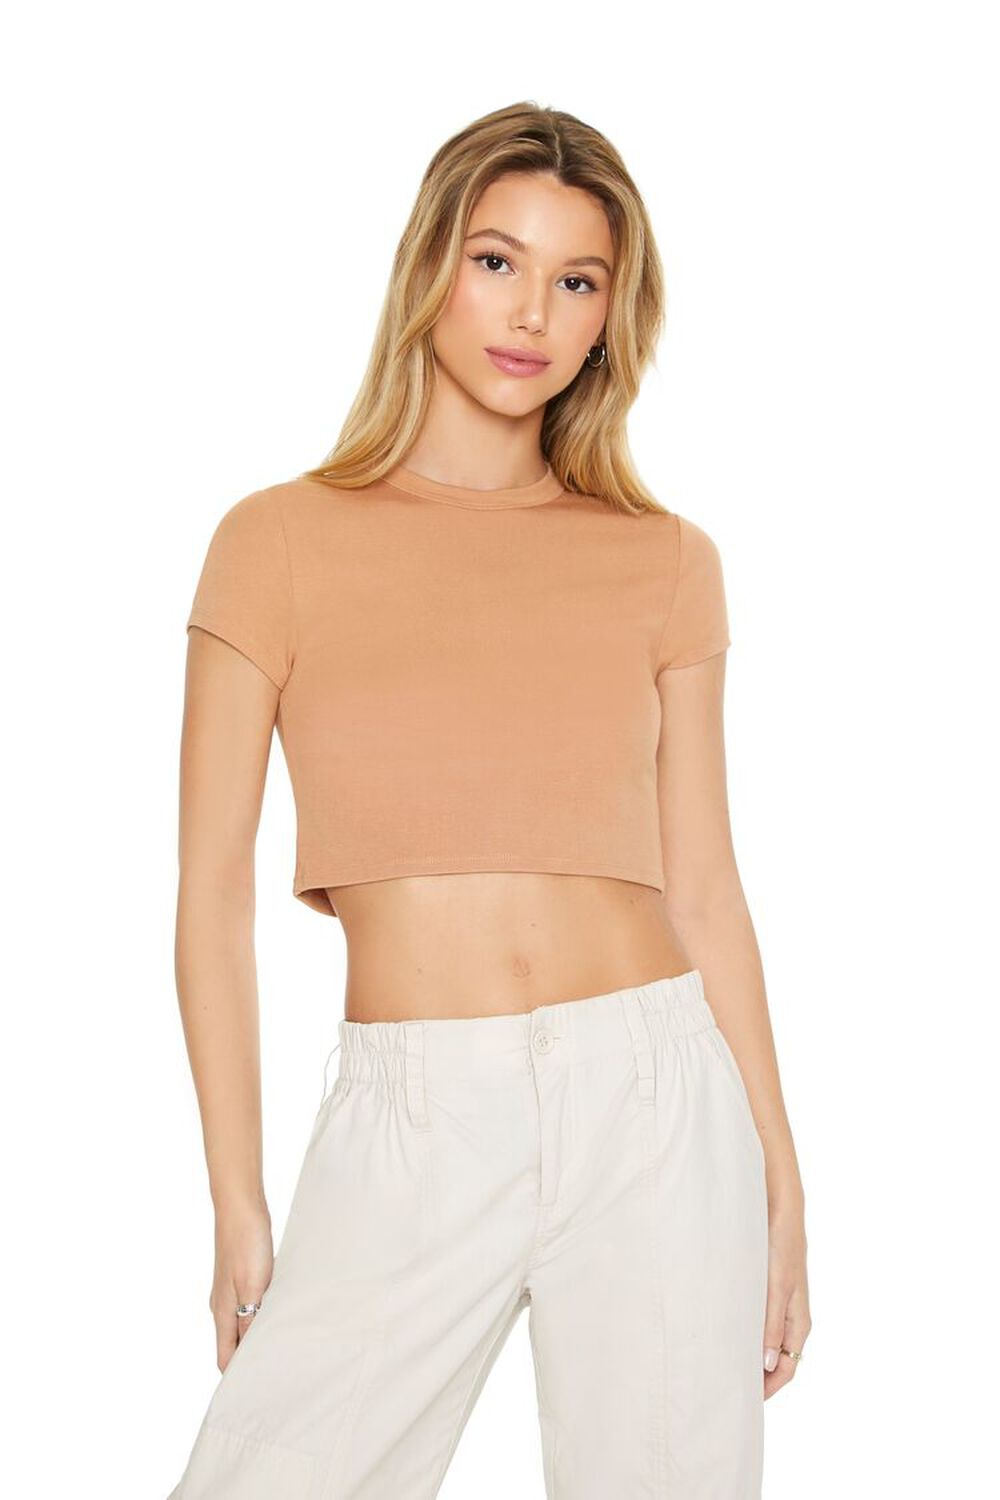 CAMEL Cropped Crew Tee, image 1